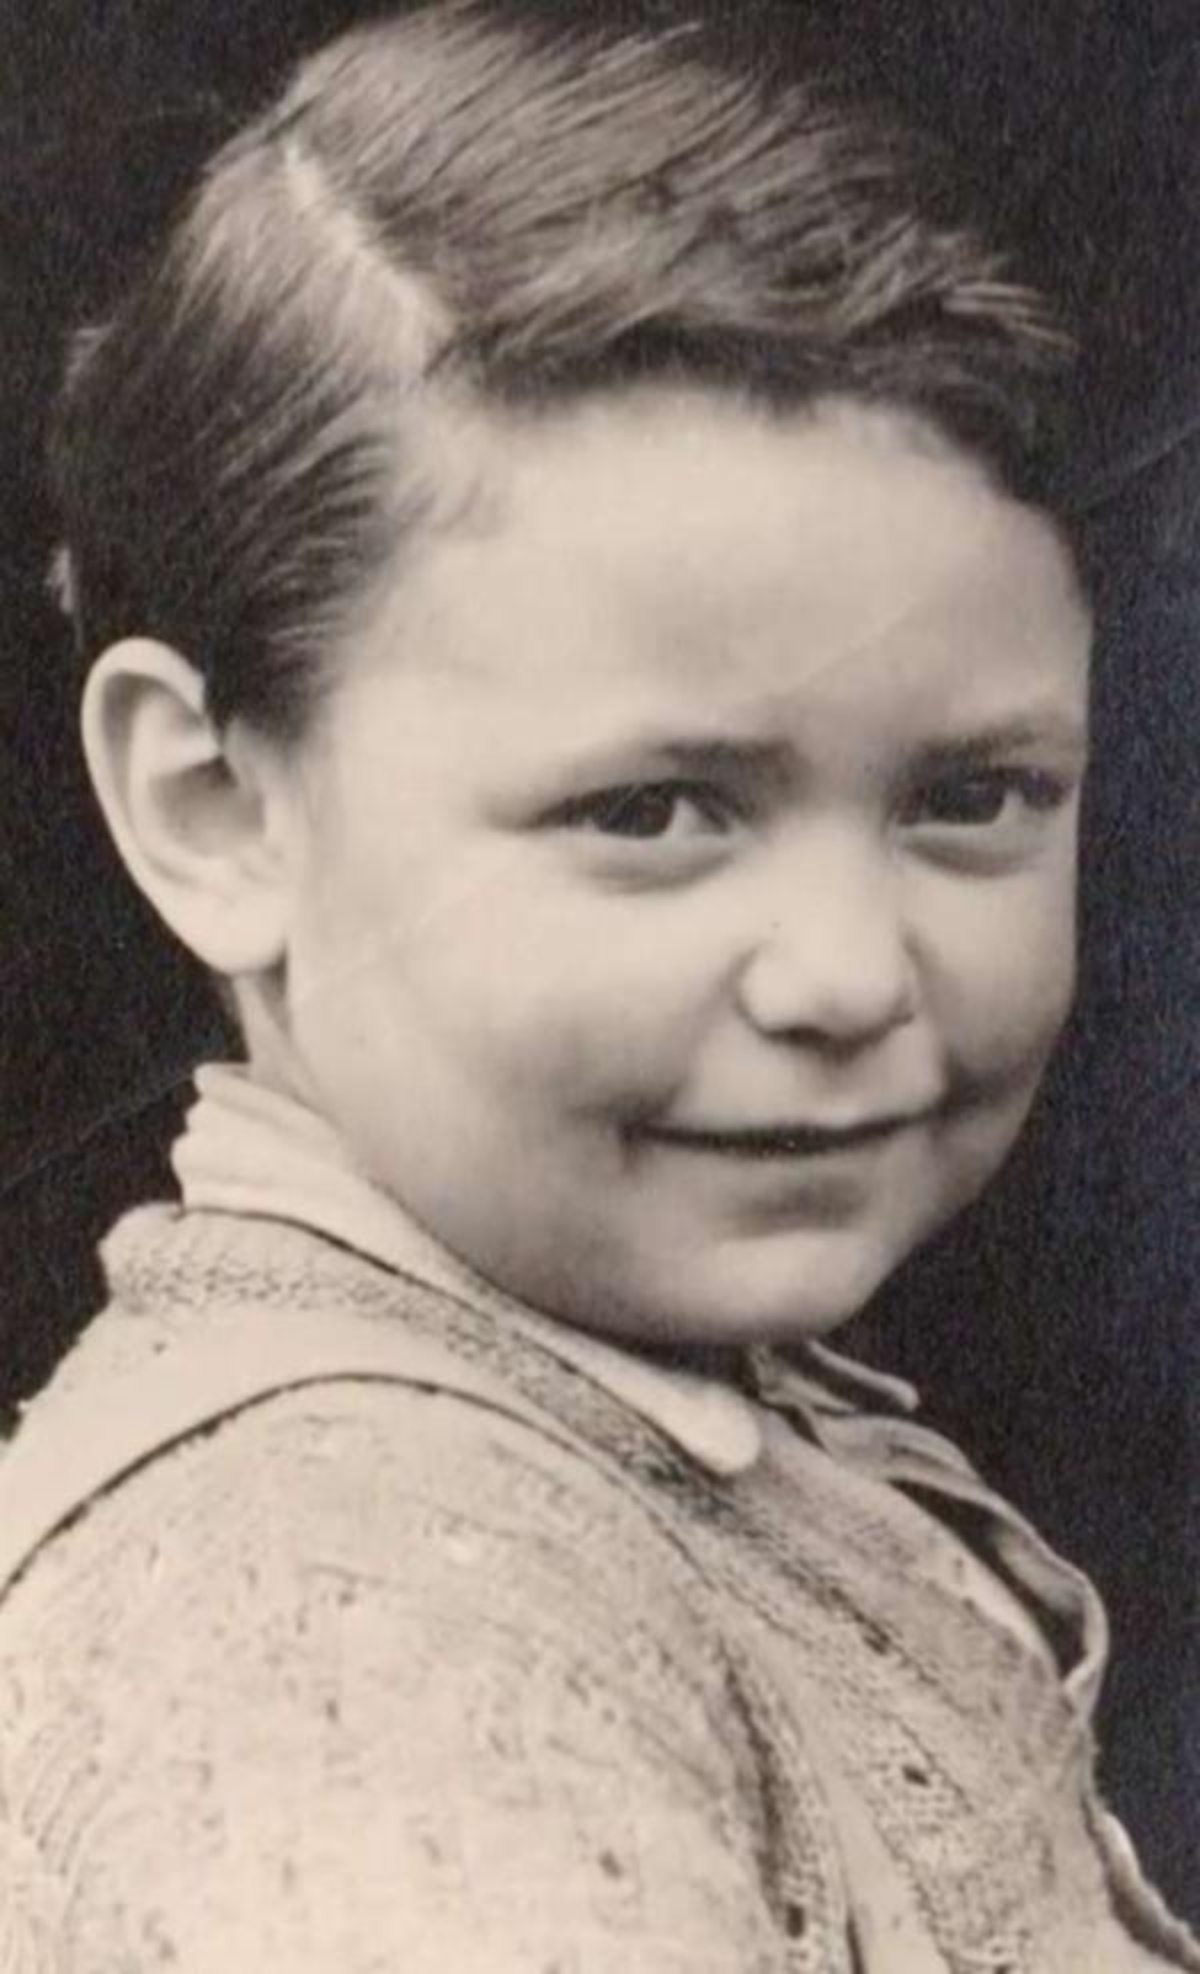 Ritchie Blackmore as a child